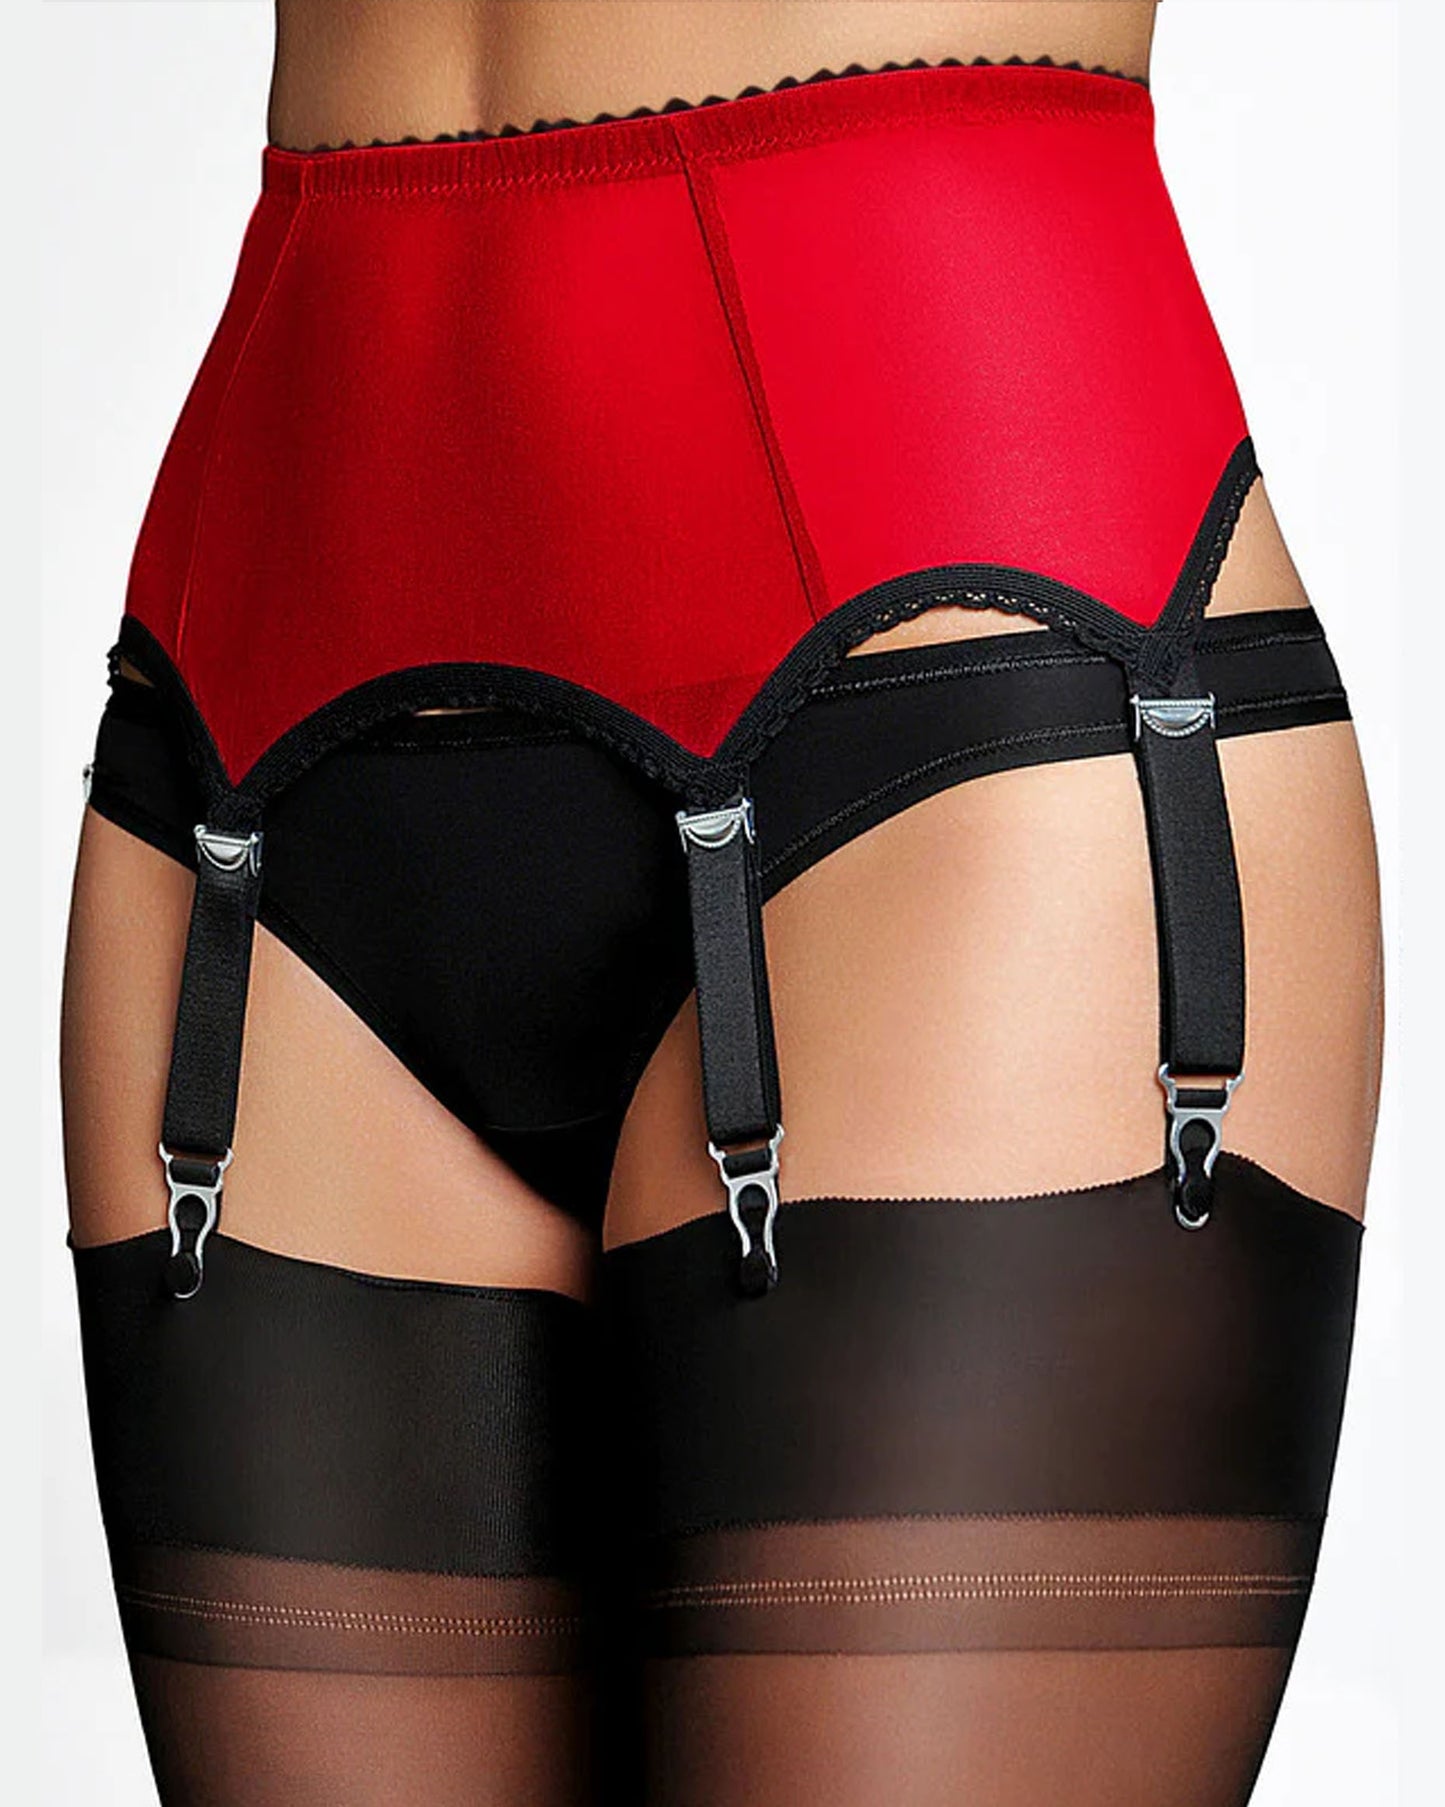 Classic red high waisted micro tulle garter belt with thick straps and metal clasps, worn with sheer black stockings..